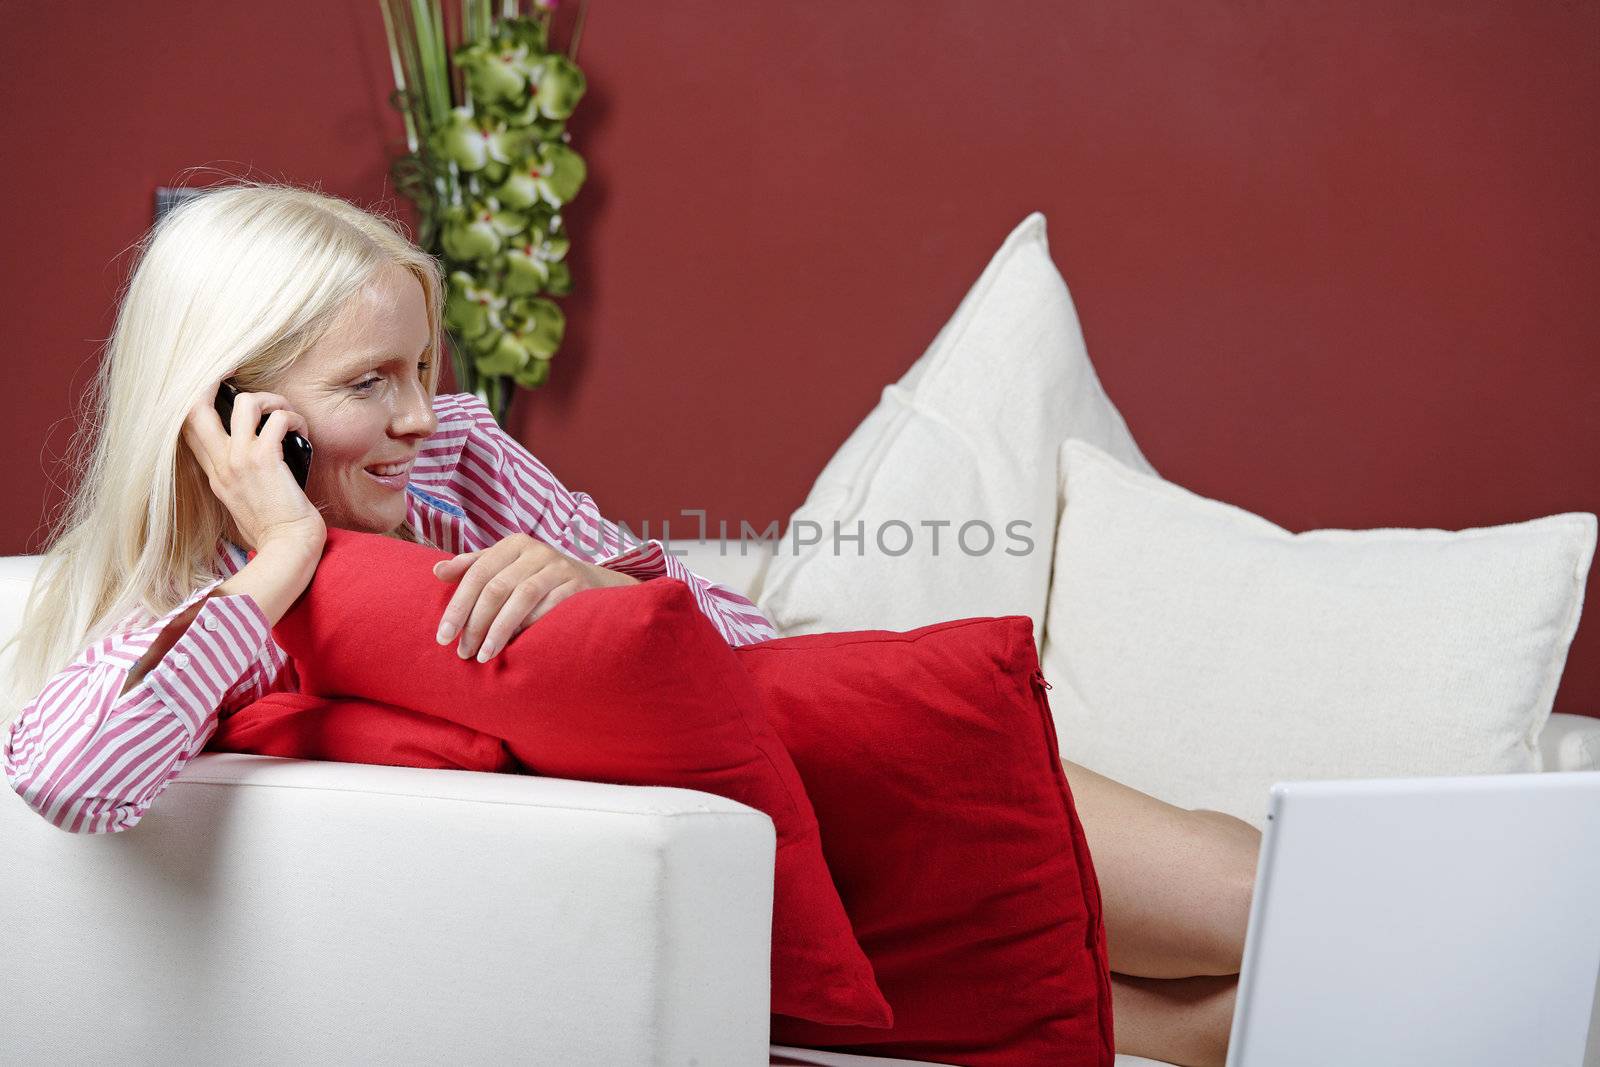 Young woman at home on sofa chatting on the mobile